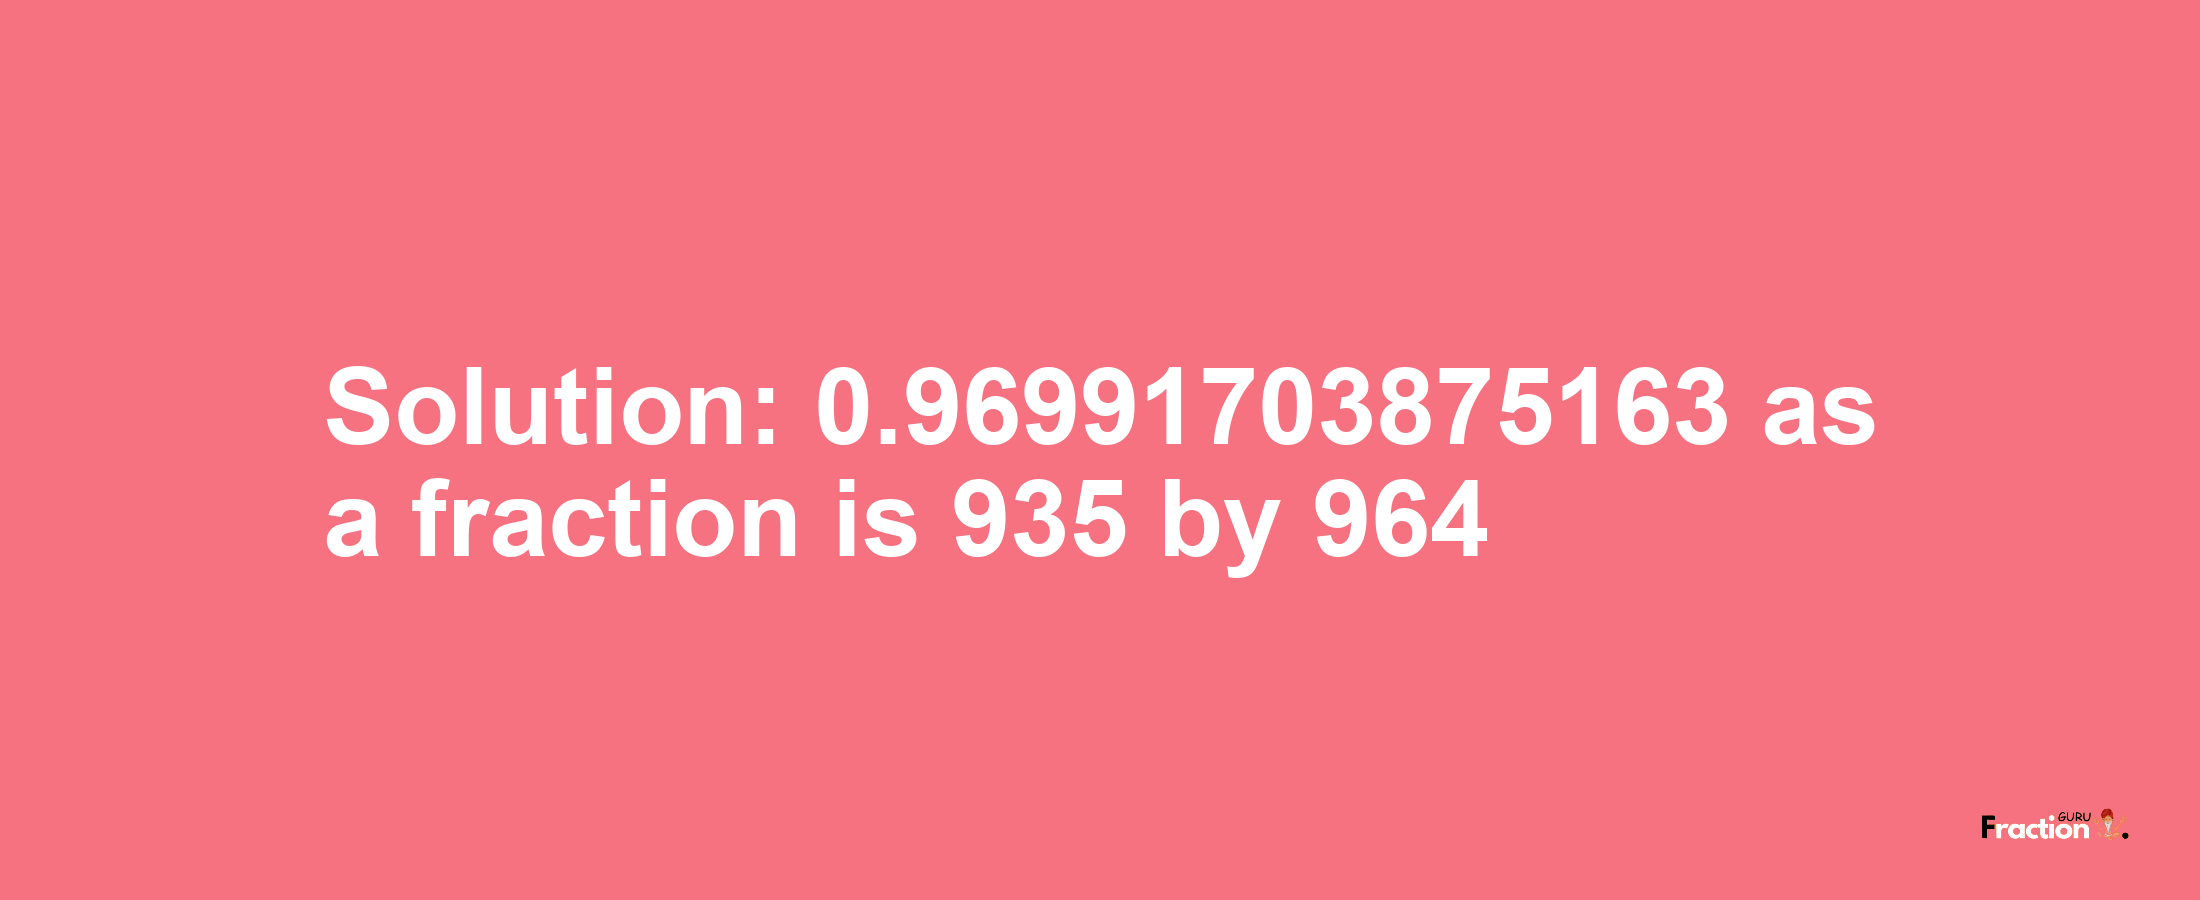 Solution:0.96991703875163 as a fraction is 935/964